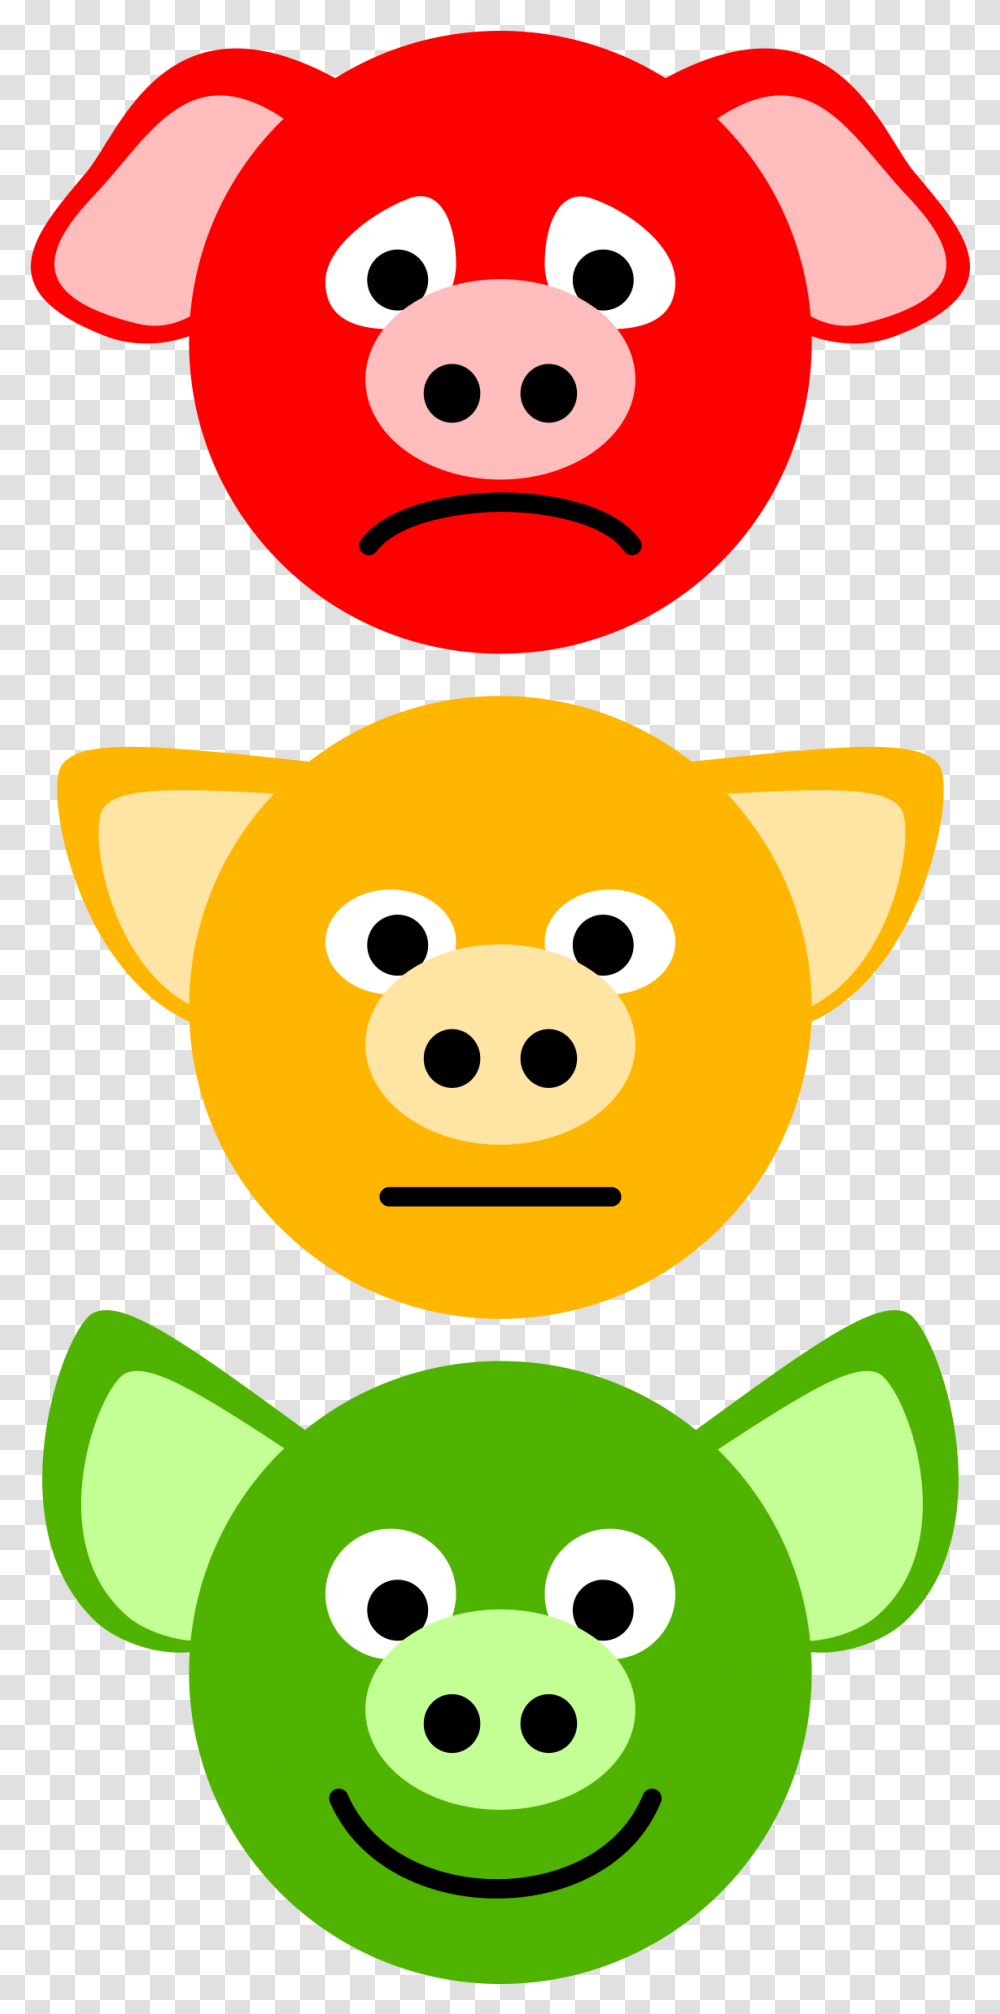 Traffic Light Clipart Face Pig Traffic Light Smiley Traffic Light Icon, Graphics, Piggy Bank, Tie, Accessories Transparent Png